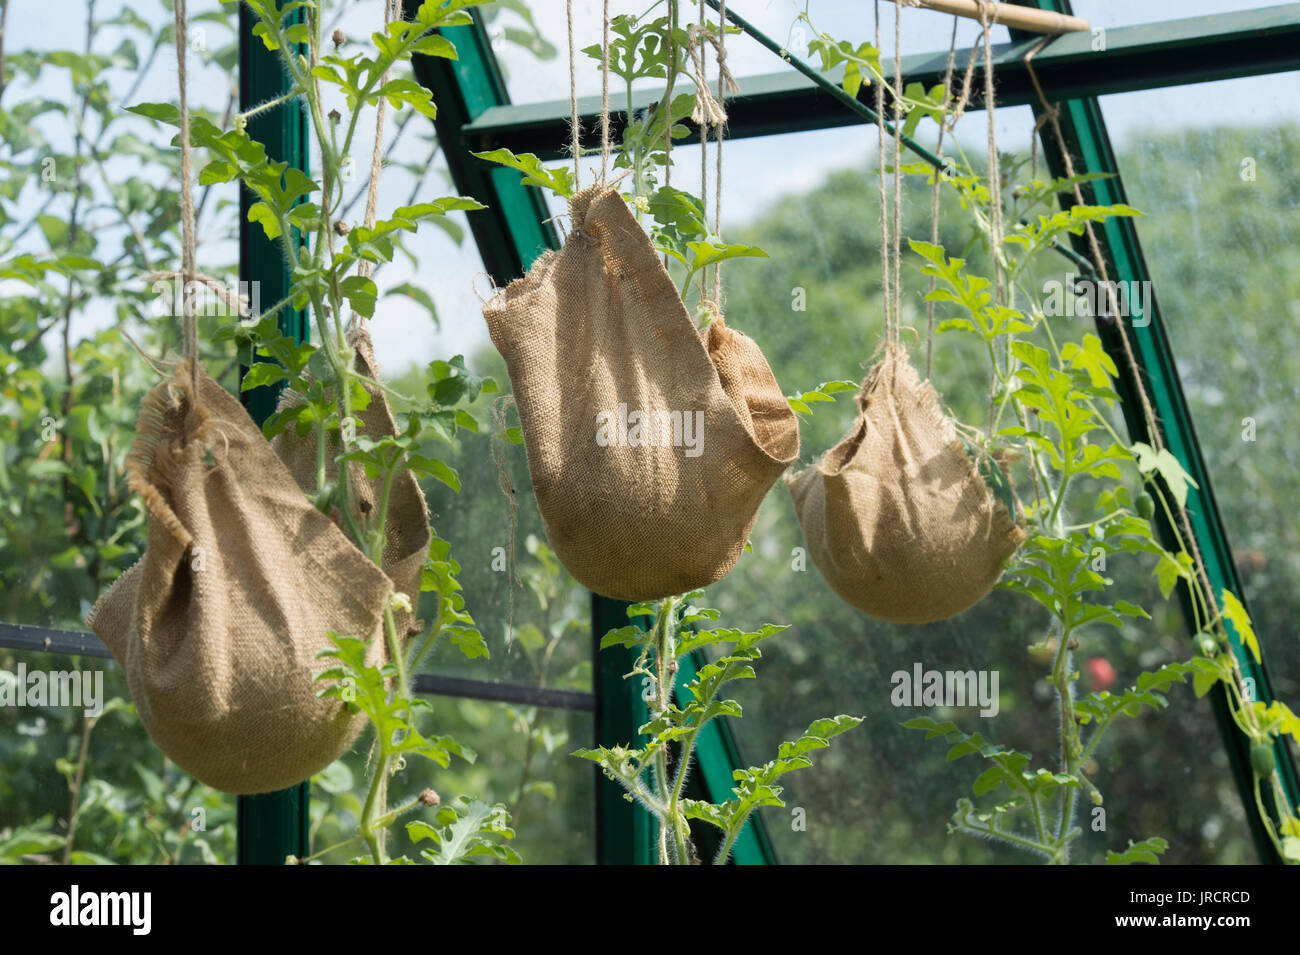 Citrullus lanatus. Watermelon fascino f1 on the vine supported by strung up hessian supports. UK Stock Photo